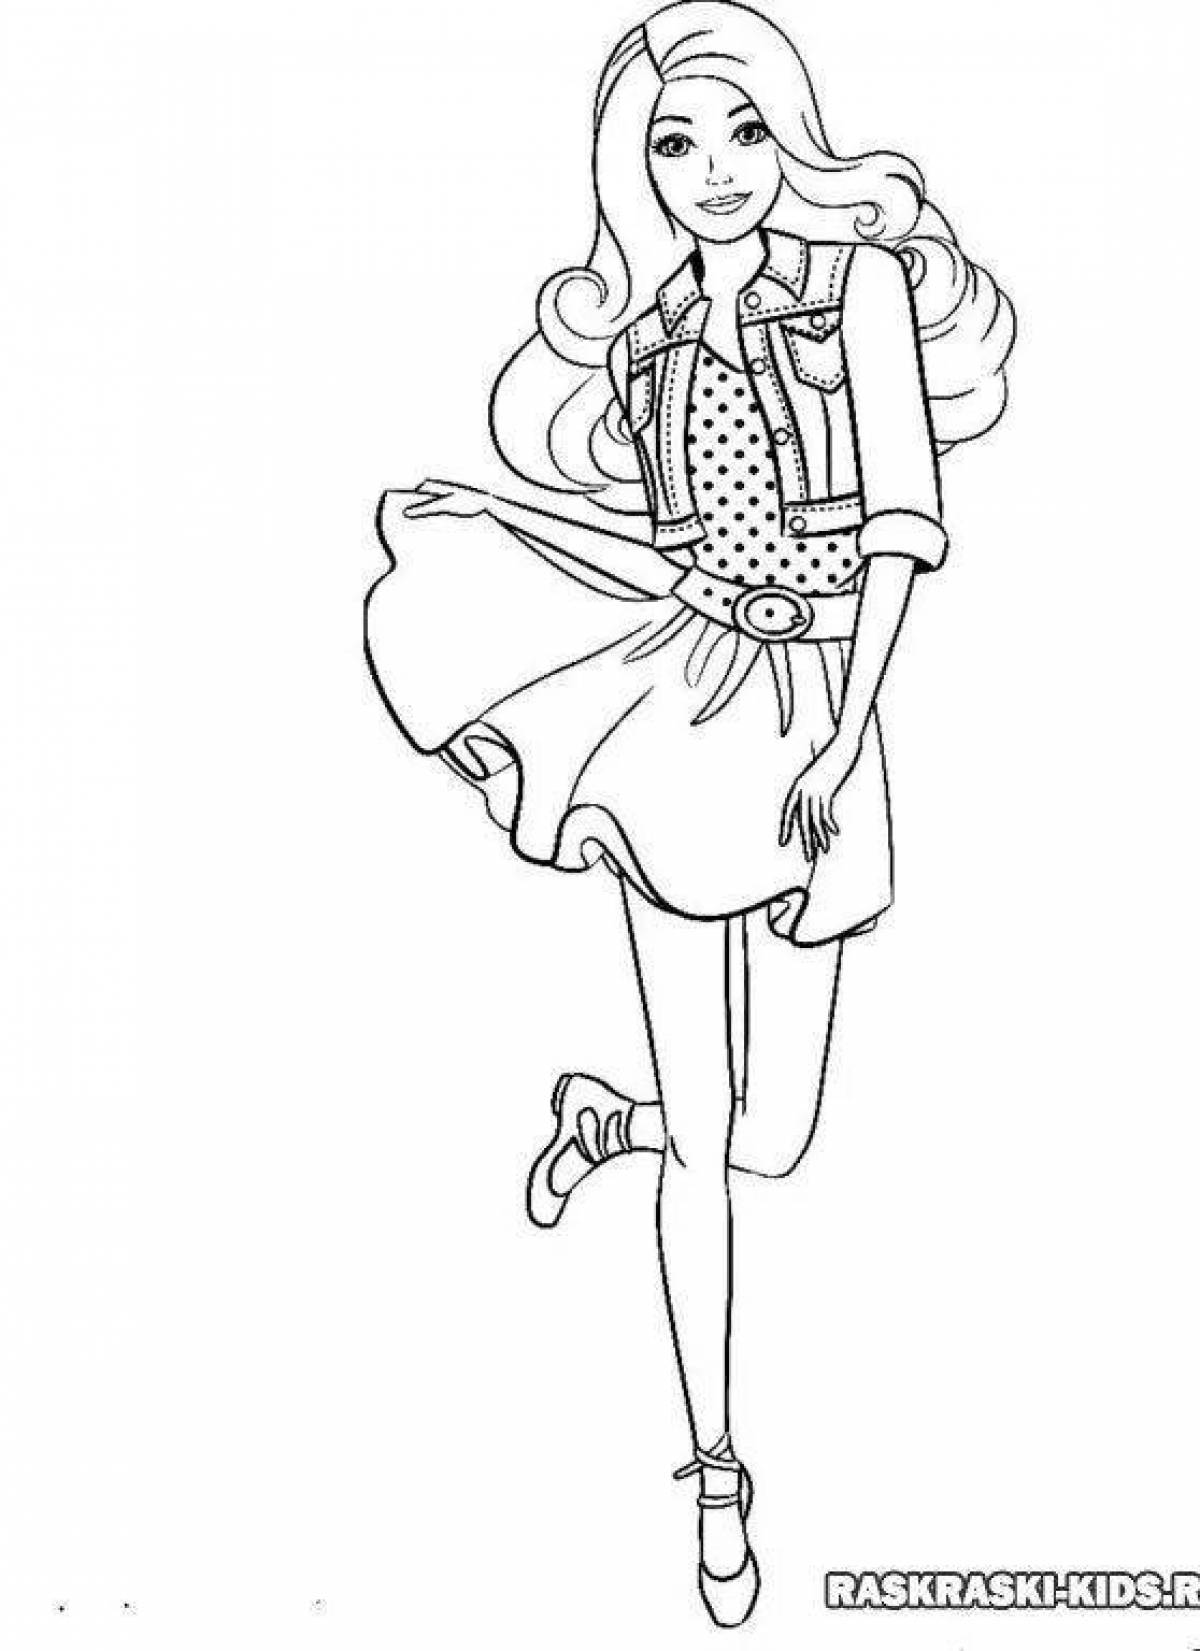 Cute barbie coloring page